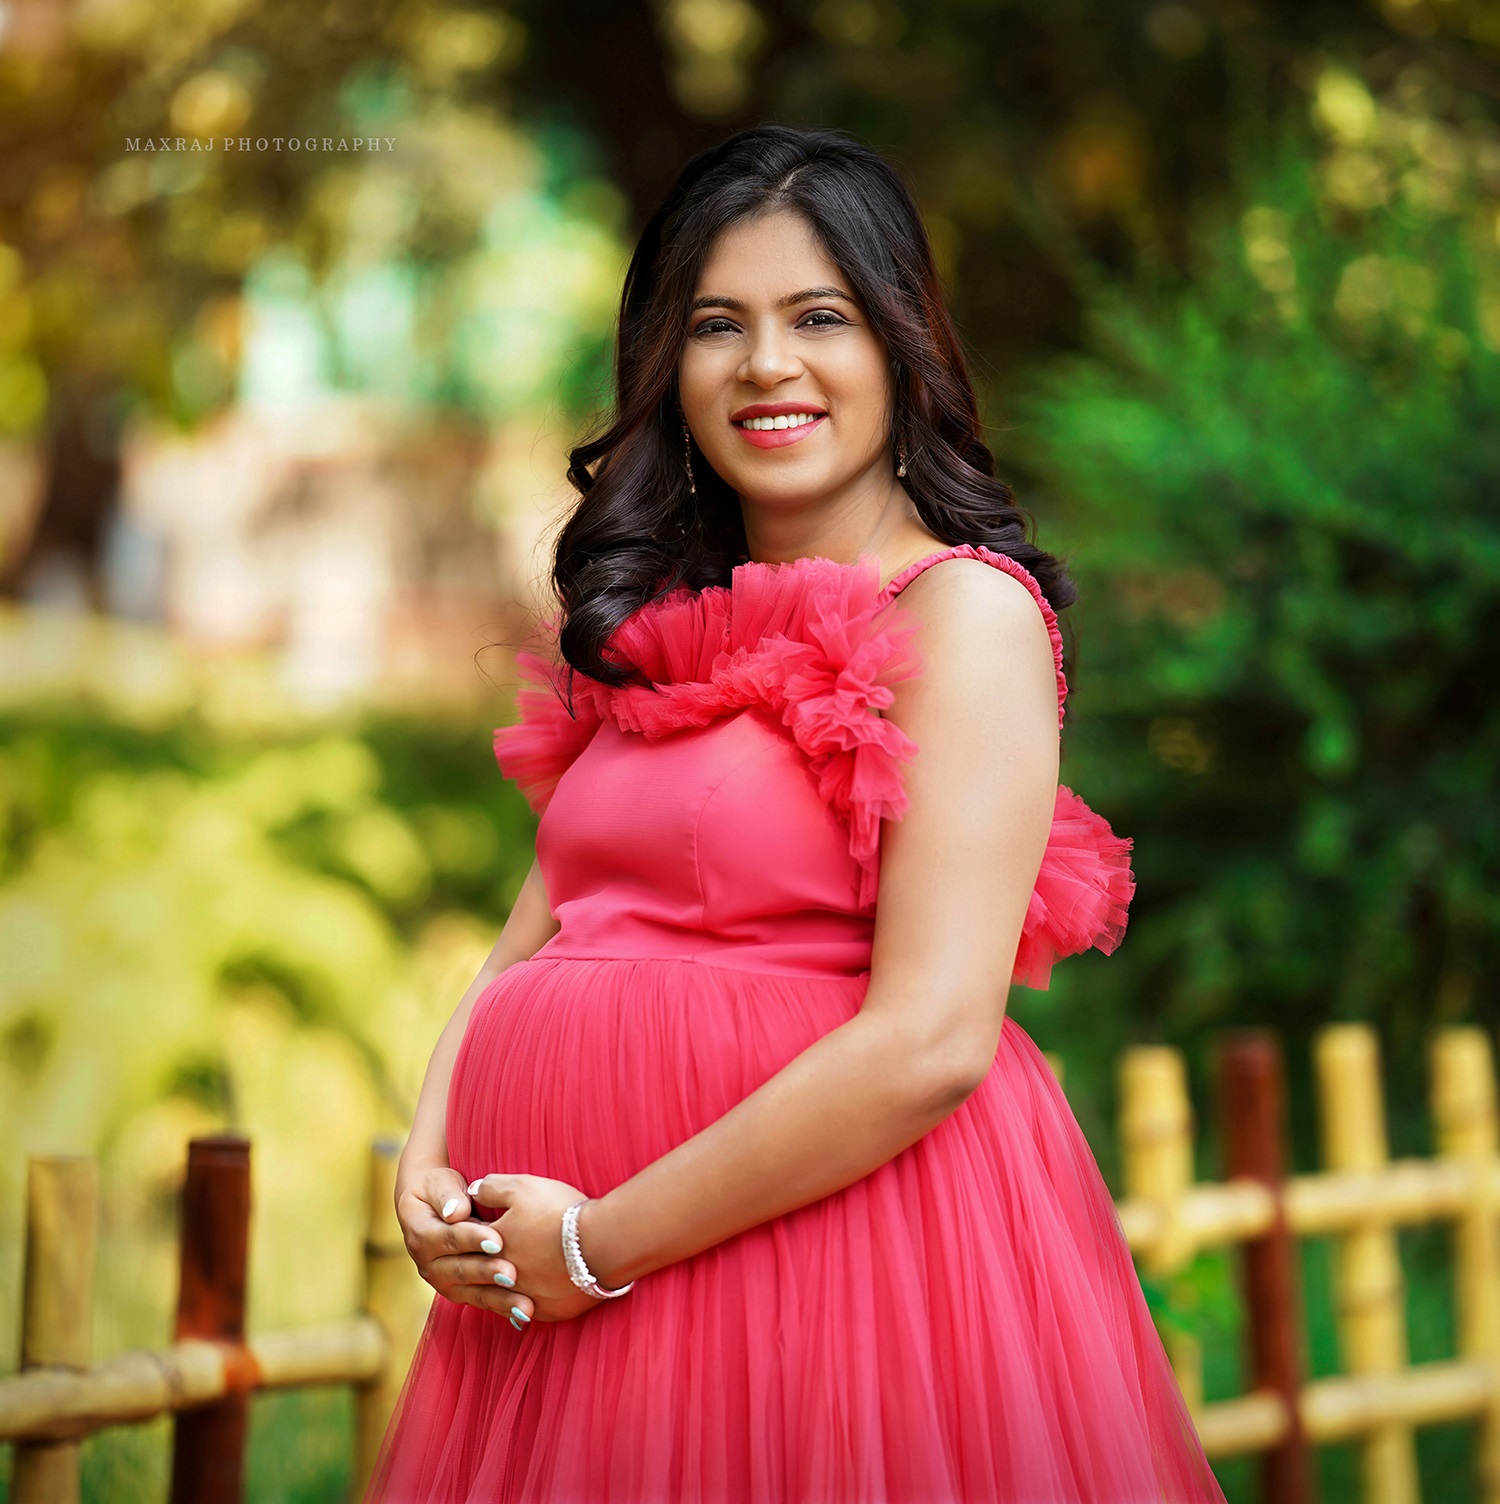 maternity photoshoot in pune garden of a pregnant lady , maternity photoshoot ideas , maternity photoshoot poses